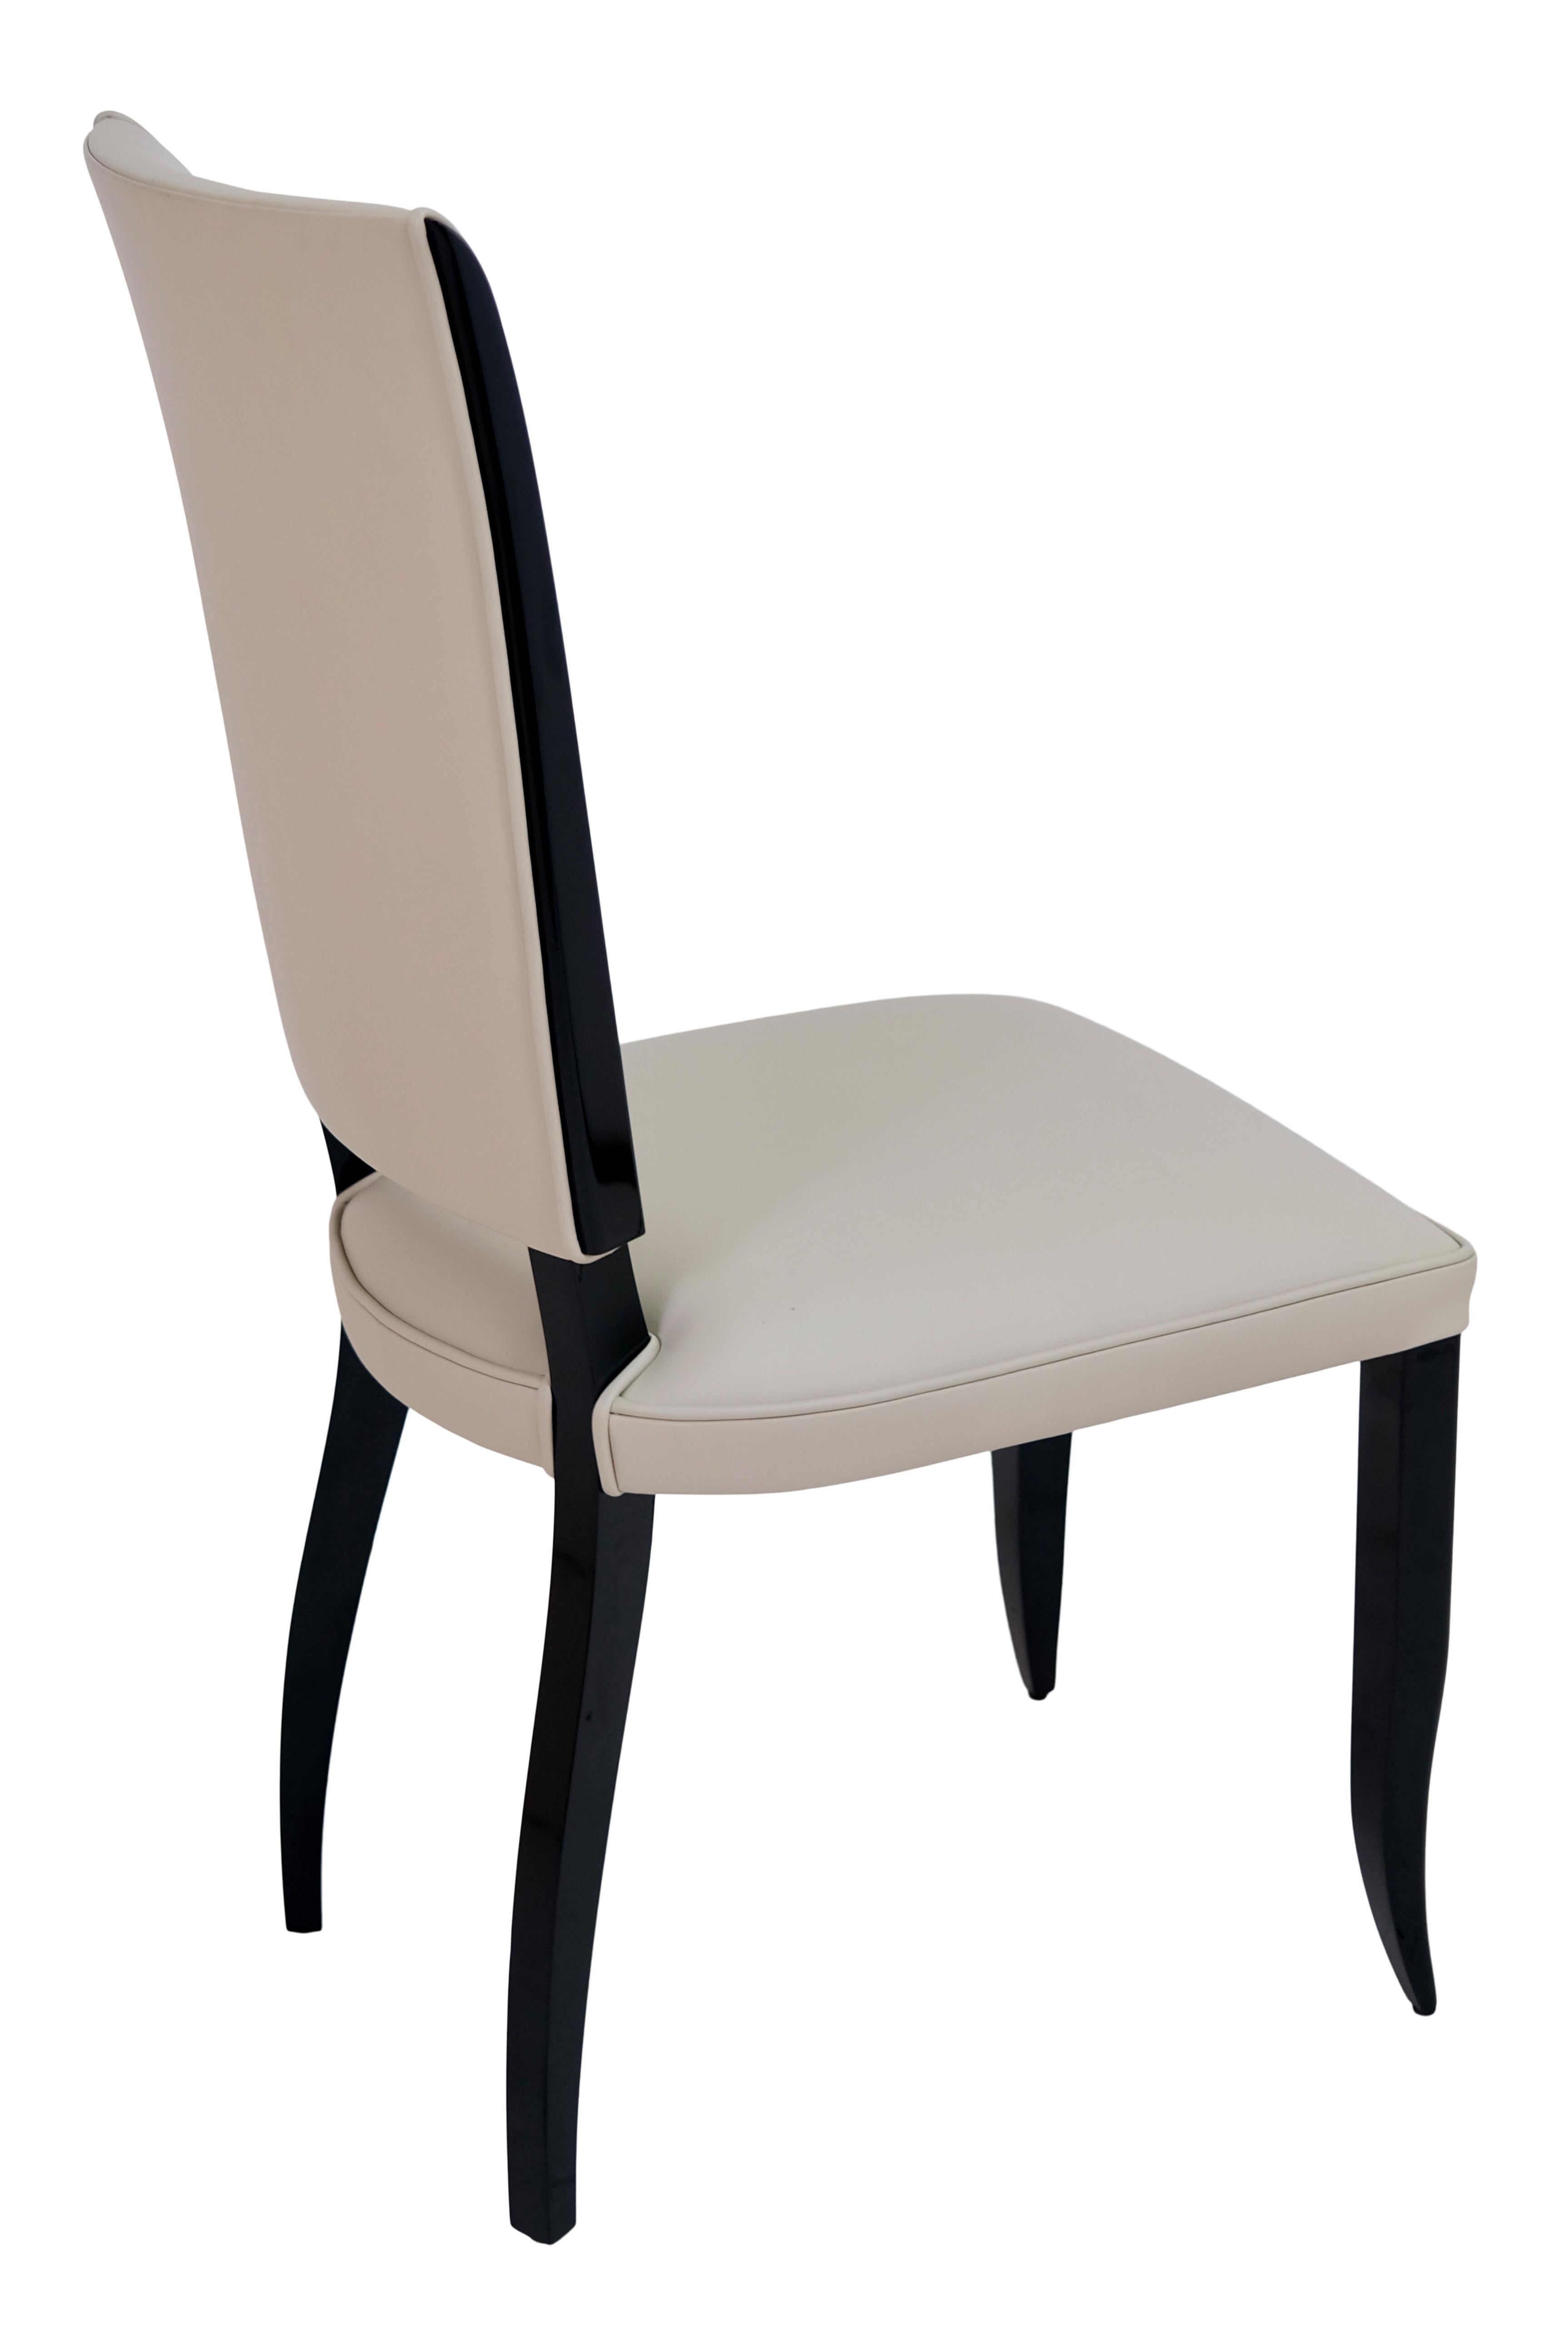 French Set of Six Typical Art Deco Dining Room Chairs Black Lacquer and Beige Leather For Sale